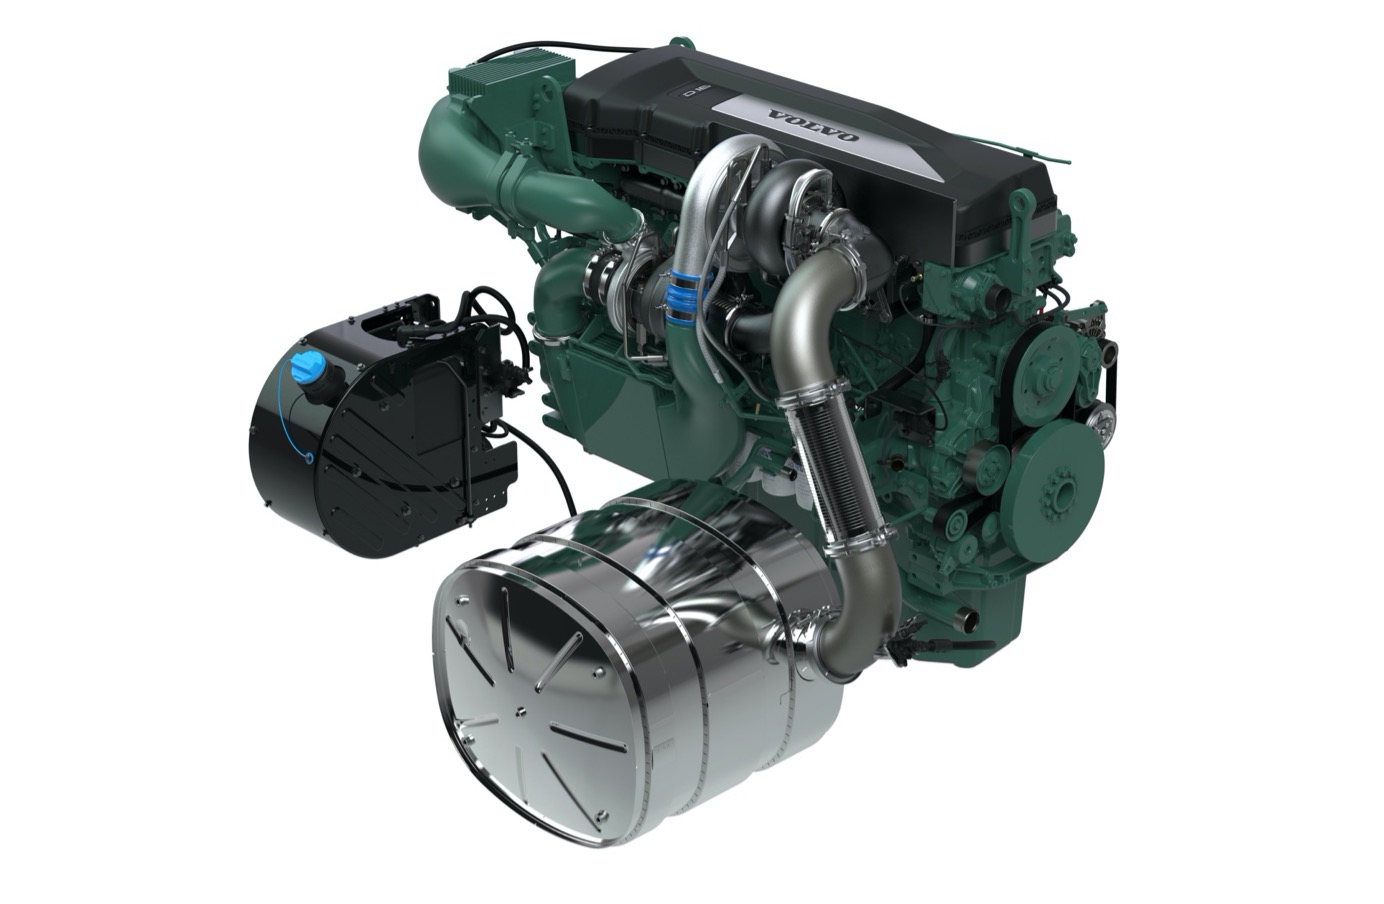 Volvo Penta’s off-road Stage V/Tier 4F D16 wins Engine of the Year Award 